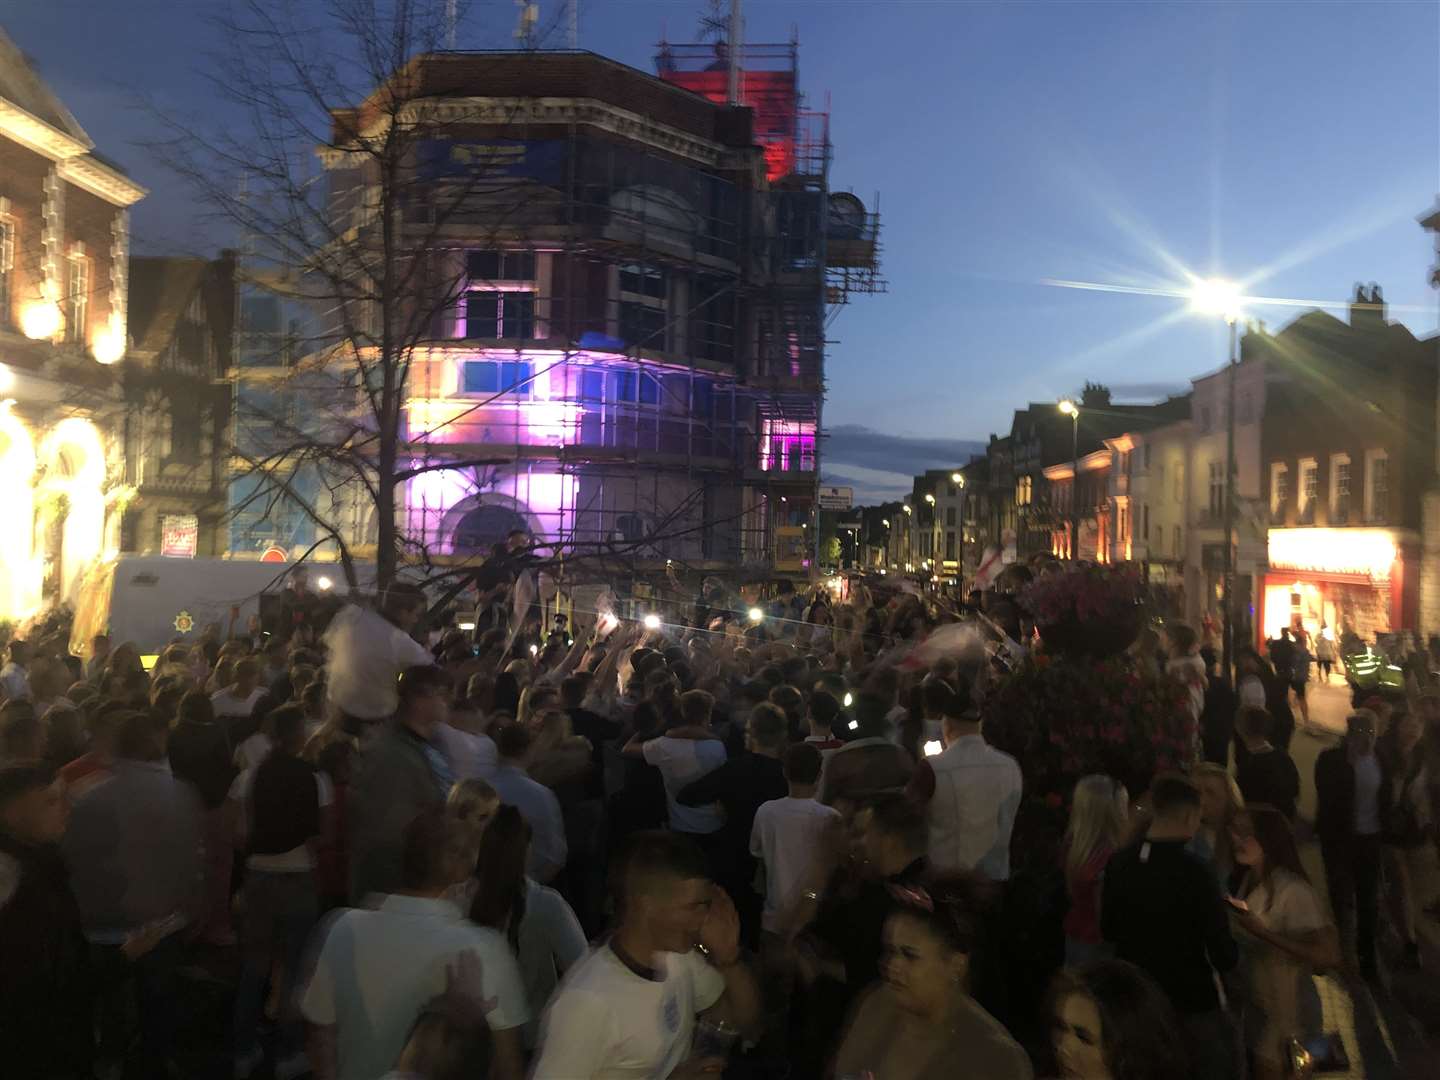 Hundreds gathered in Maidstone town centre after the England vs. Ukraine game